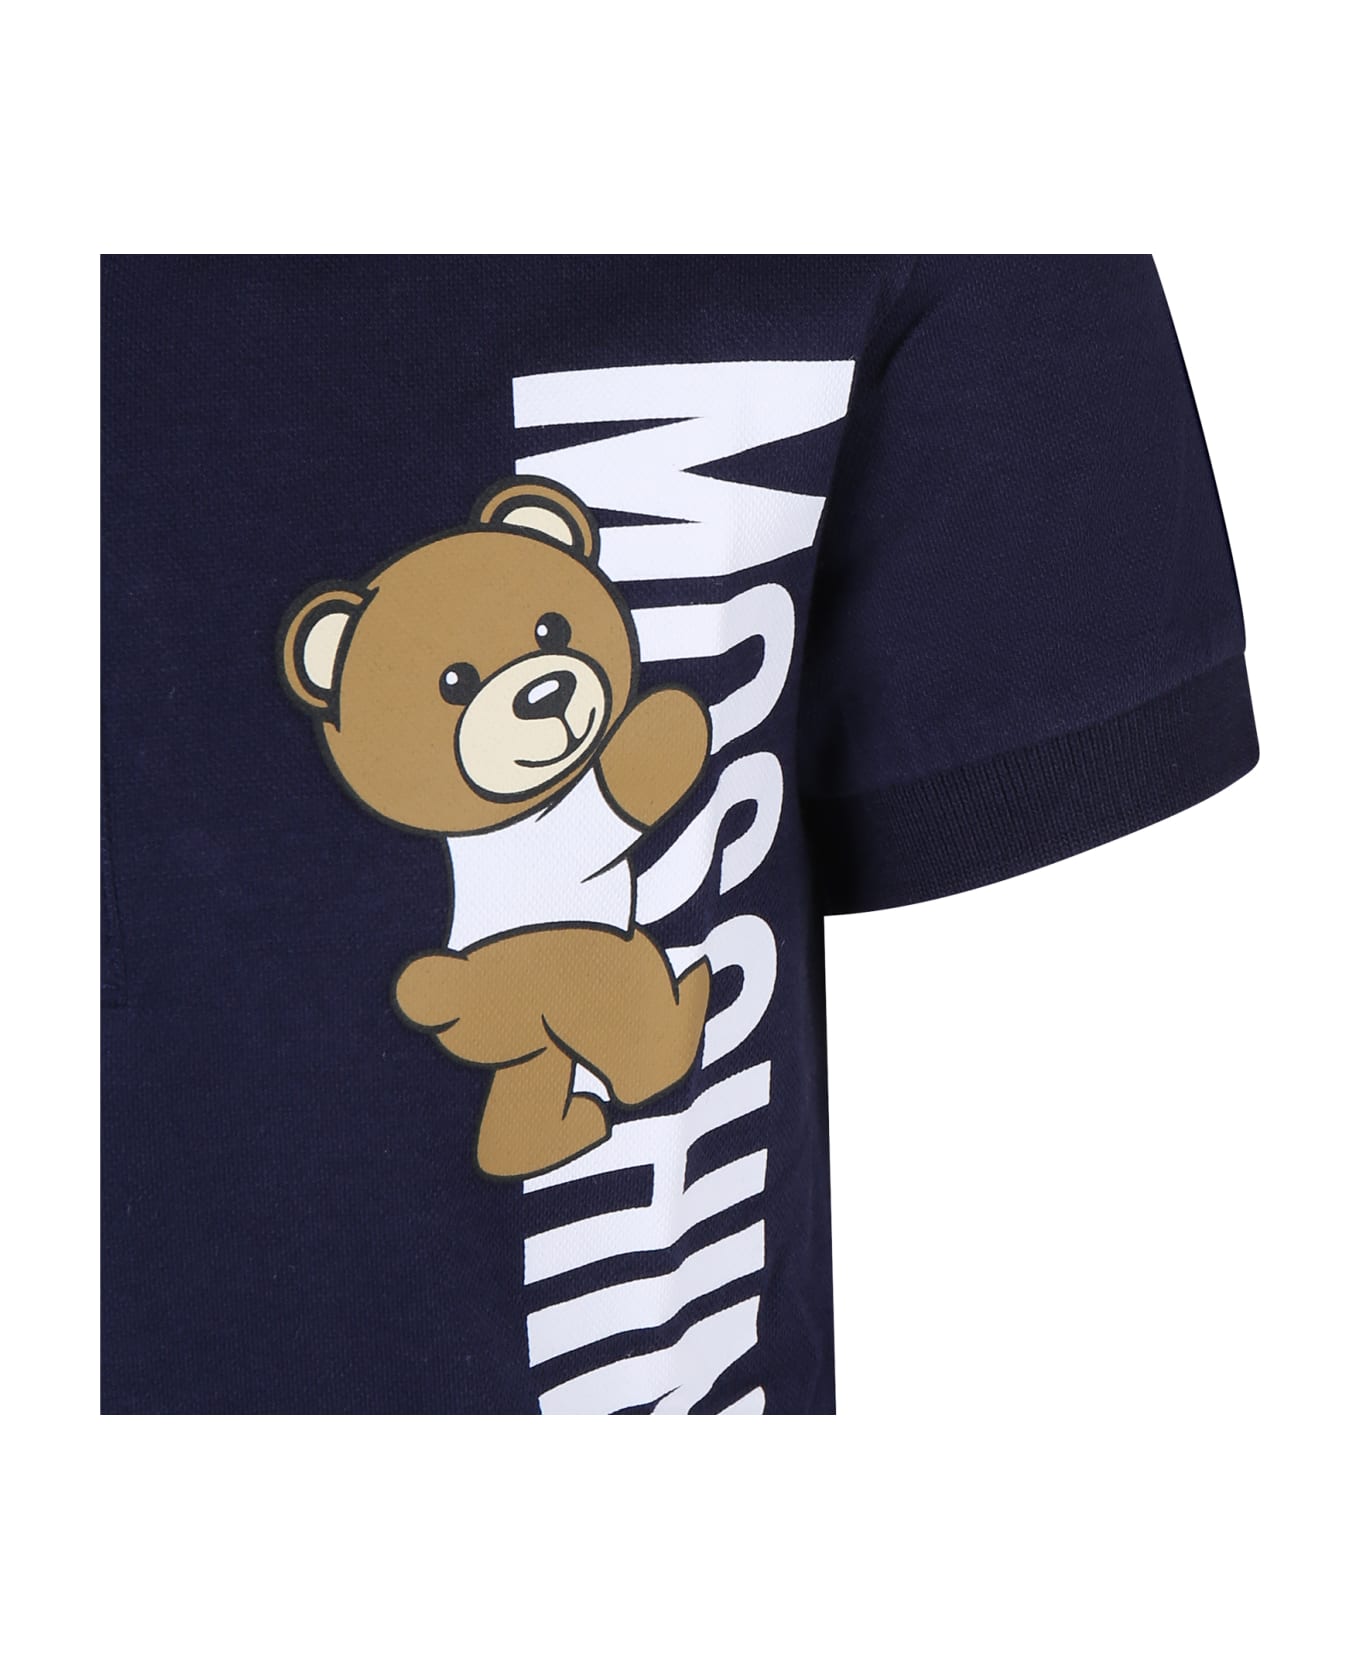 Moschino Blue Polo Shirt For Boy With Teddy Bear And Logo - Blue